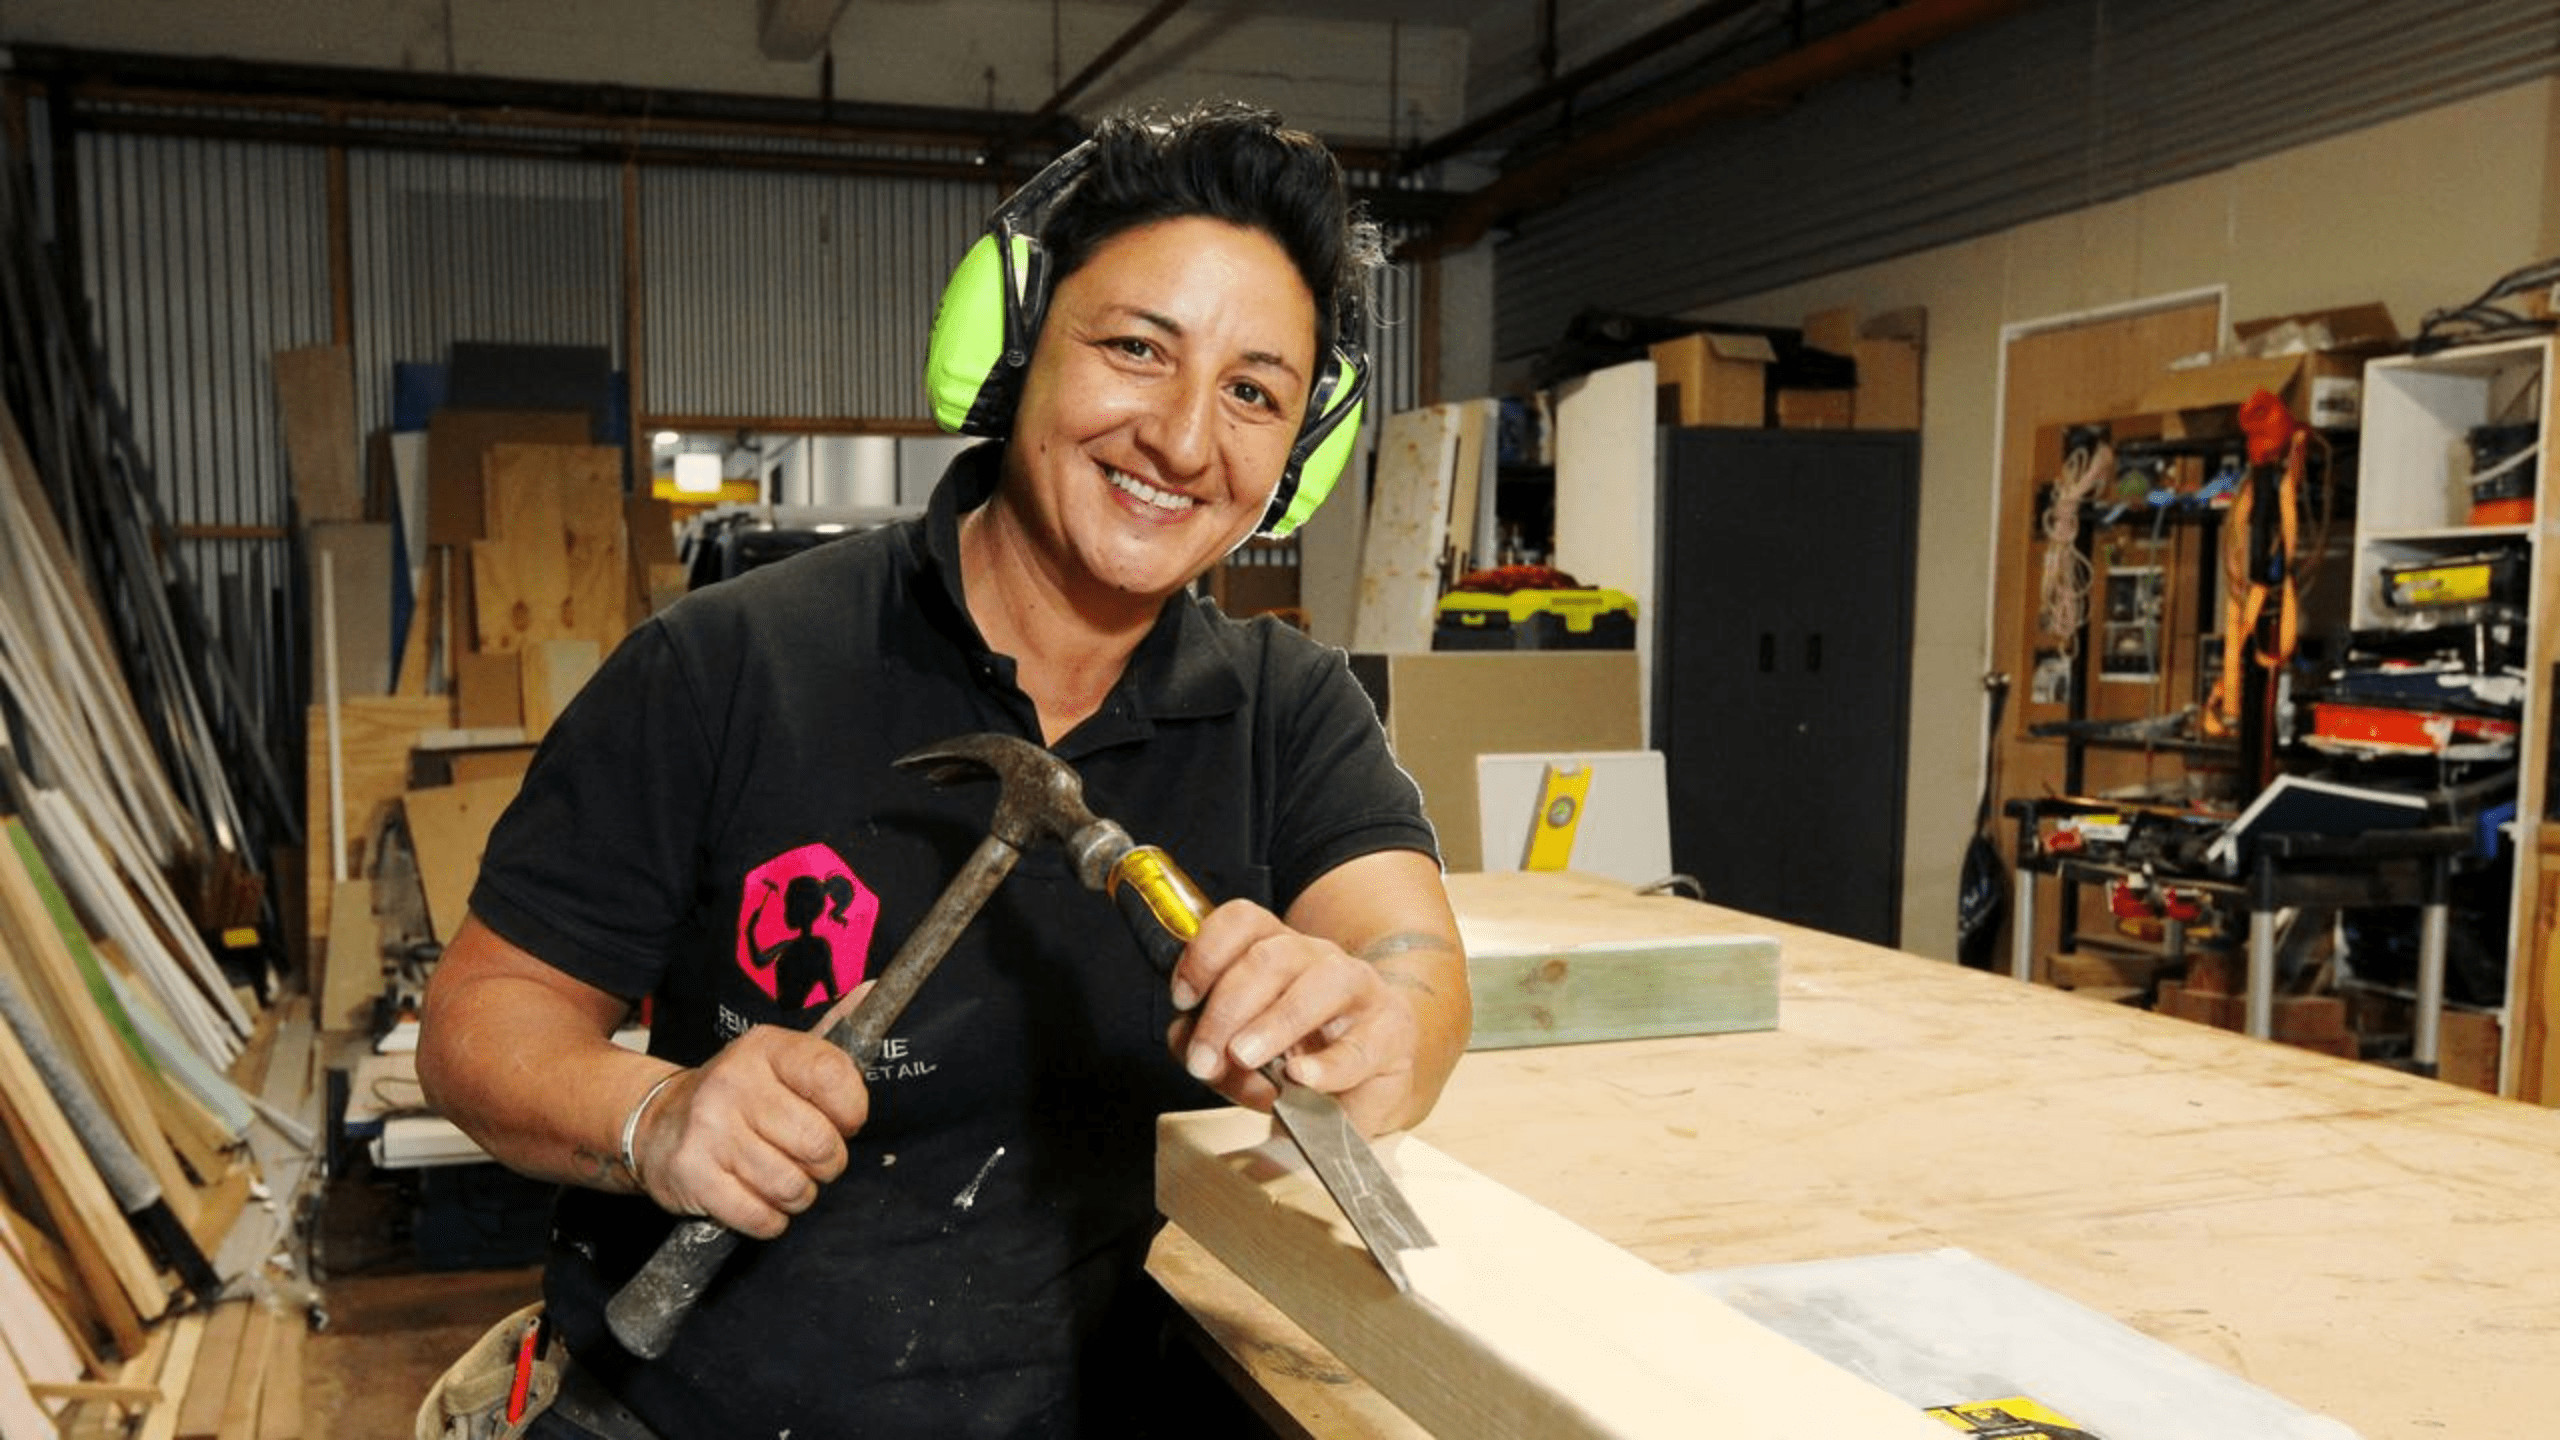 Women in Construction - the tradie lady